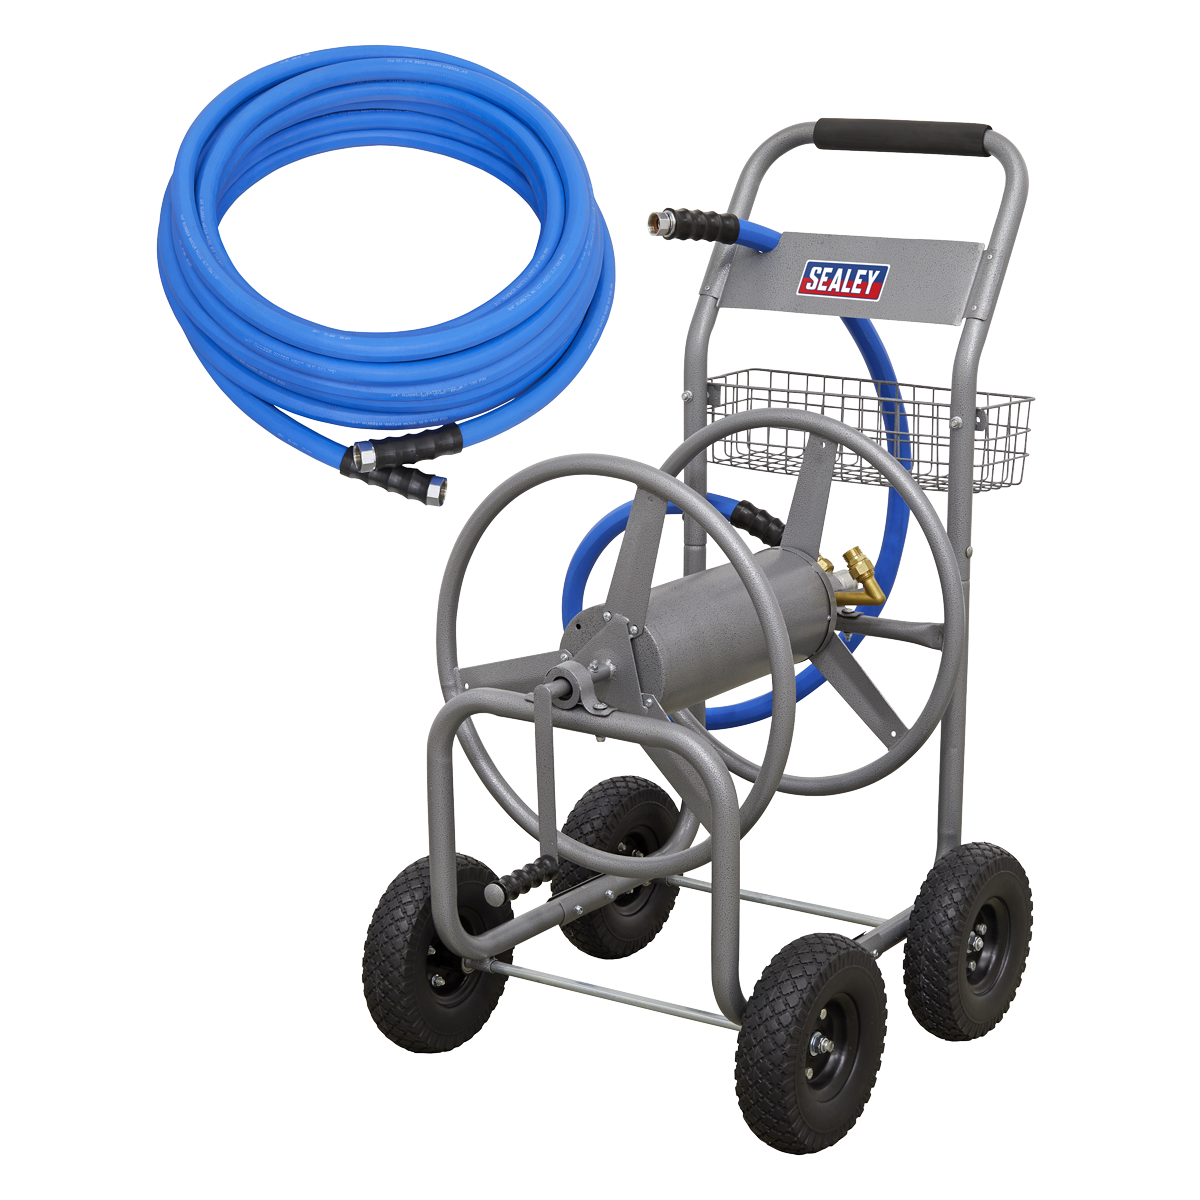 Sealey Heavy-Duty Hose Reel Cart with 5m Heavy-Duty Ø19mm Hot & Cold Rubber Water Hose HRKIT5